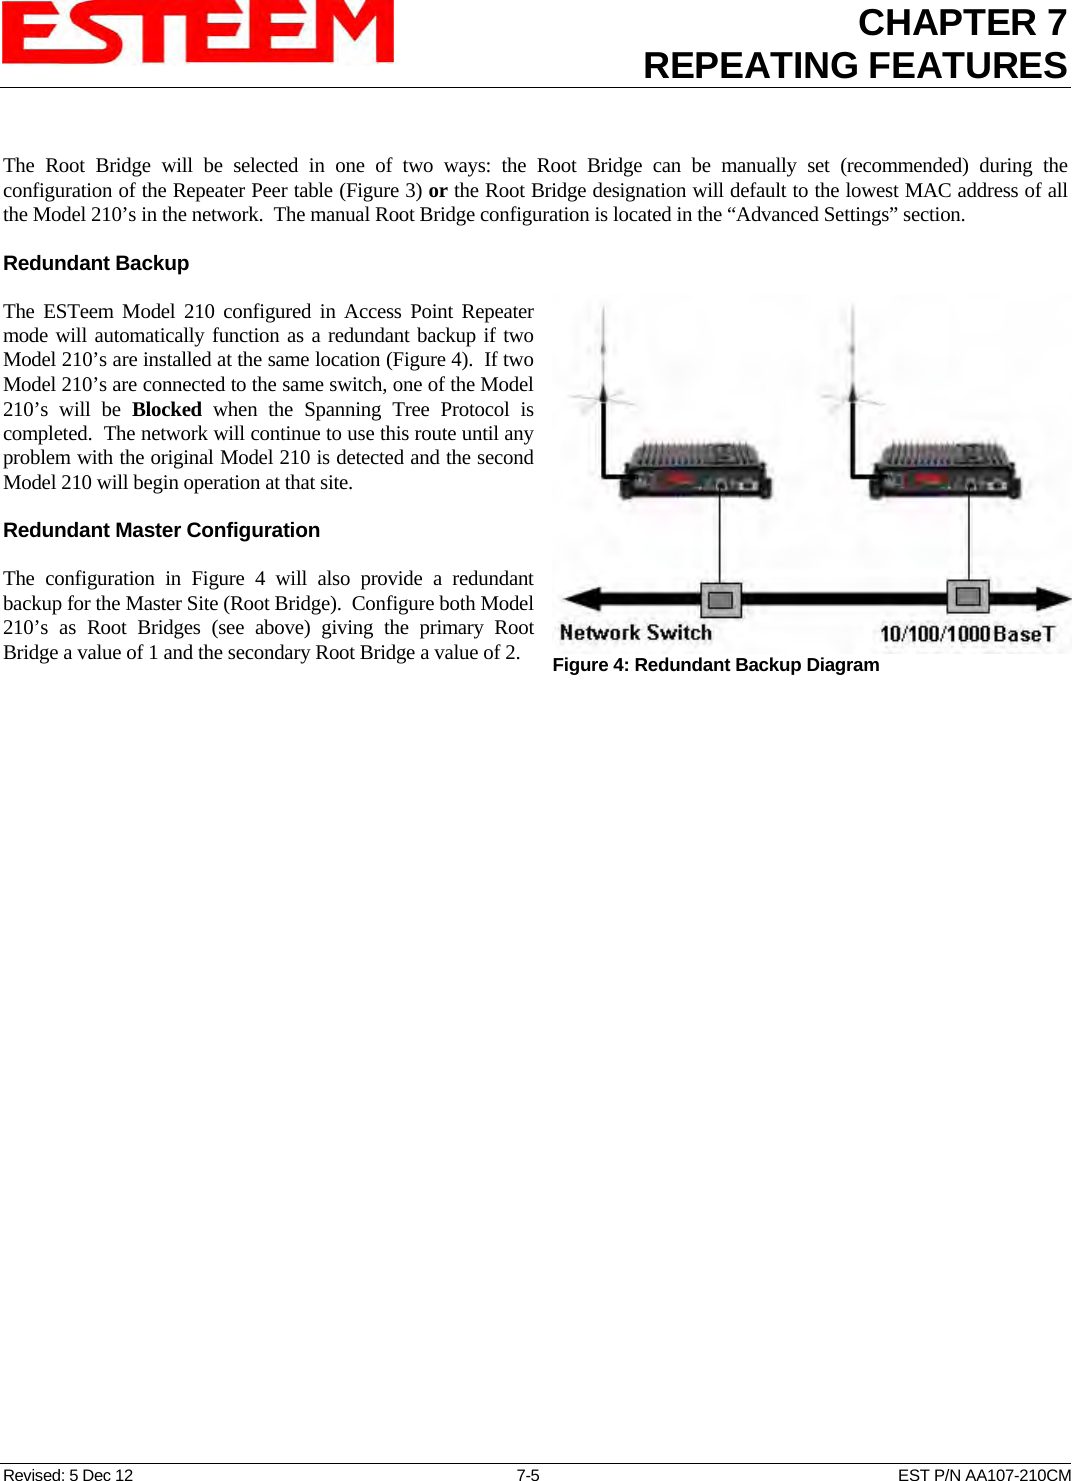 CHAPTER 7REPEATING FEATURES   Revised: 5 Dec 12  7-5  EST P/N AA107-210CM  The Root Bridge will be selected in one of two ways: the Root Bridge can be manually set (recommended) during the configuration of the Repeater Peer table (Figure 3) or the Root Bridge designation will default to the lowest MAC address of all the Model 210’s in the network.  The manual Root Bridge configuration is located in the “Advanced Settings” section.  Redundant Backup   Figure 4: Redundant Backup Diagram The ESTeem Model 210 configured in Access Point Repeater mode will automatically function as a redundant backup if two Model 210’s are installed at the same location (Figure 4).  If two Model 210’s are connected to the same switch, one of the Model 210’s will be Blocked when the Spanning Tree Protocol is completed.  The network will continue to use this route until any problem with the original Model 210 is detected and the second Model 210 will begin operation at that site.  Redundant Master Configuration  The configuration in Figure 4 will also provide a redundant backup for the Master Site (Root Bridge).  Configure both Model 210’s as Root Bridges (see above) giving the primary Root Bridge a value of 1 and the secondary Root Bridge a value of 2.  